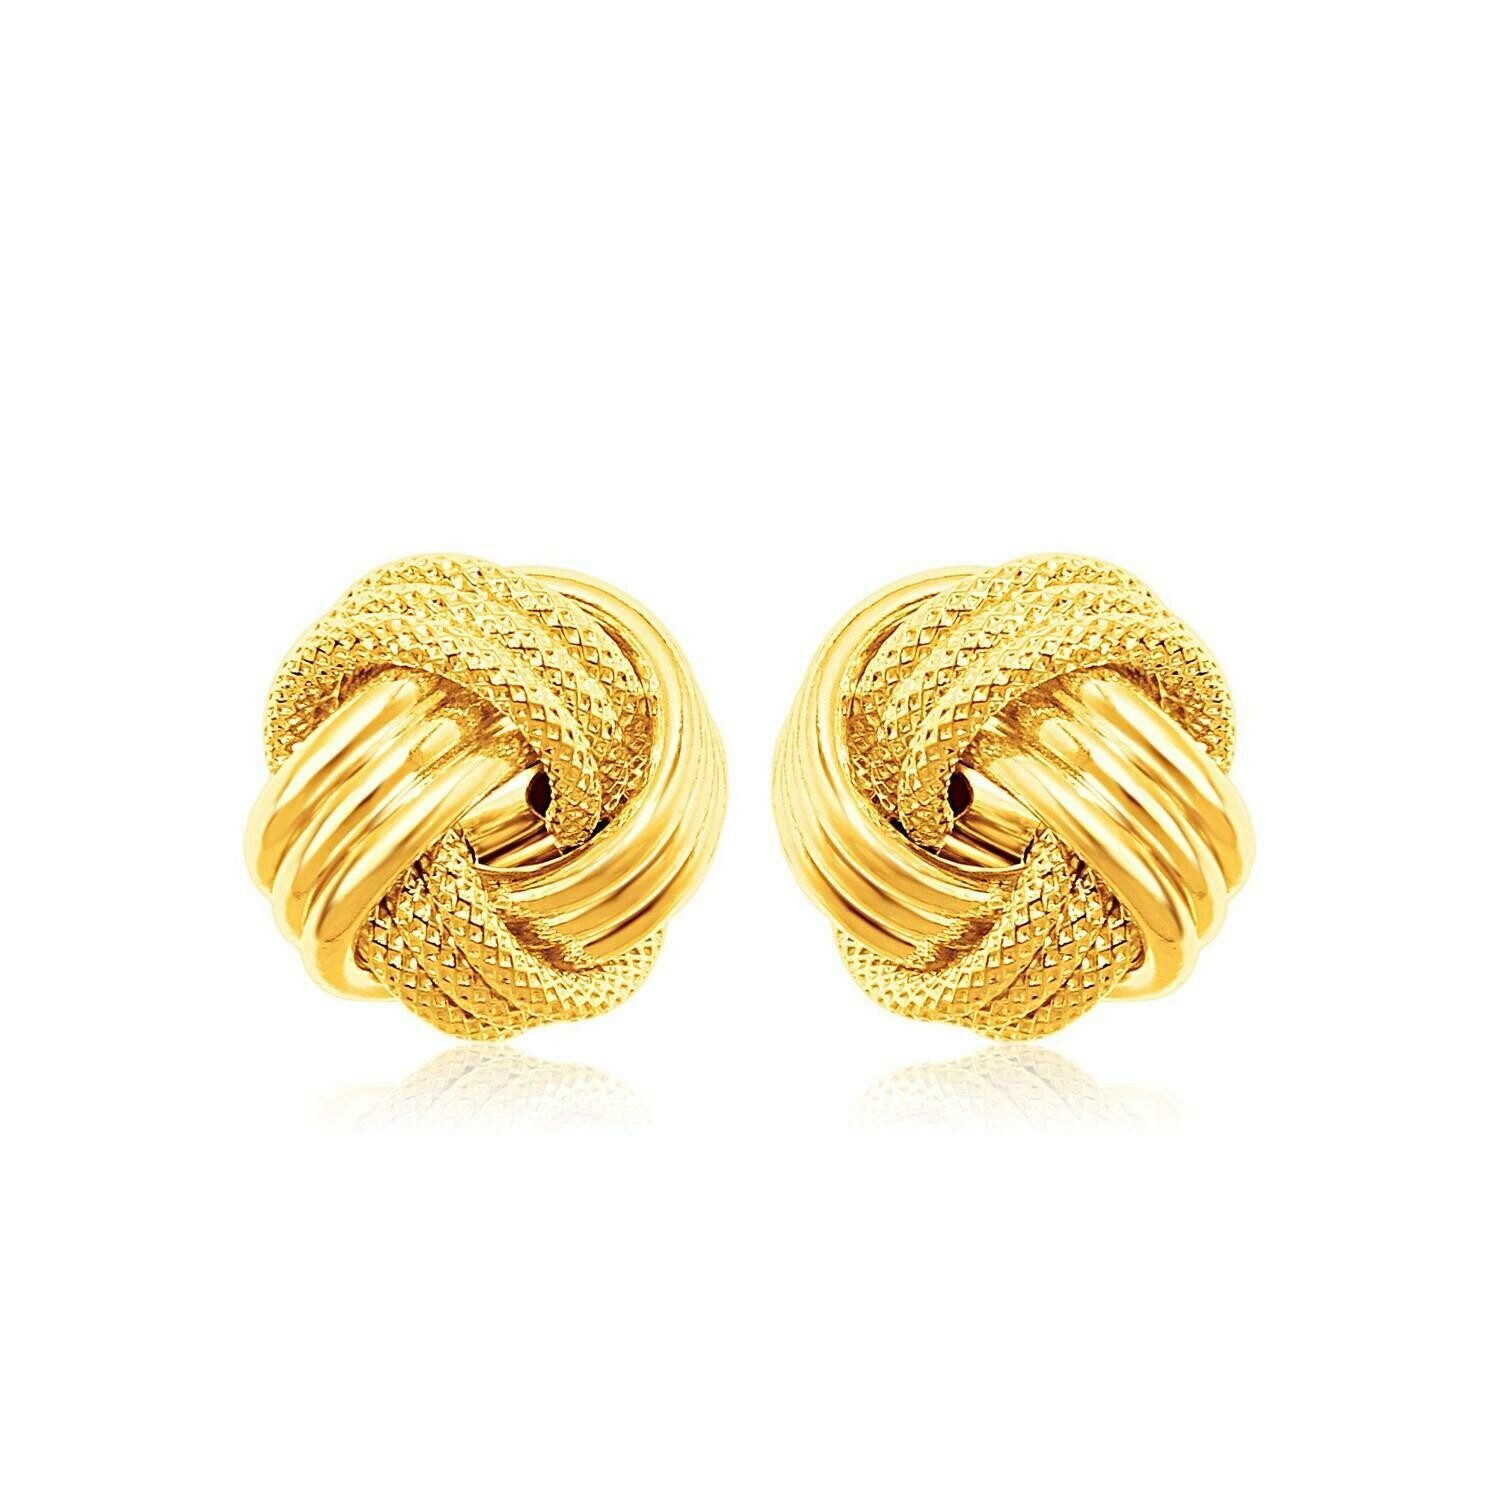 14k Yellow Gold Love Knot with Ridge Texture Earrings